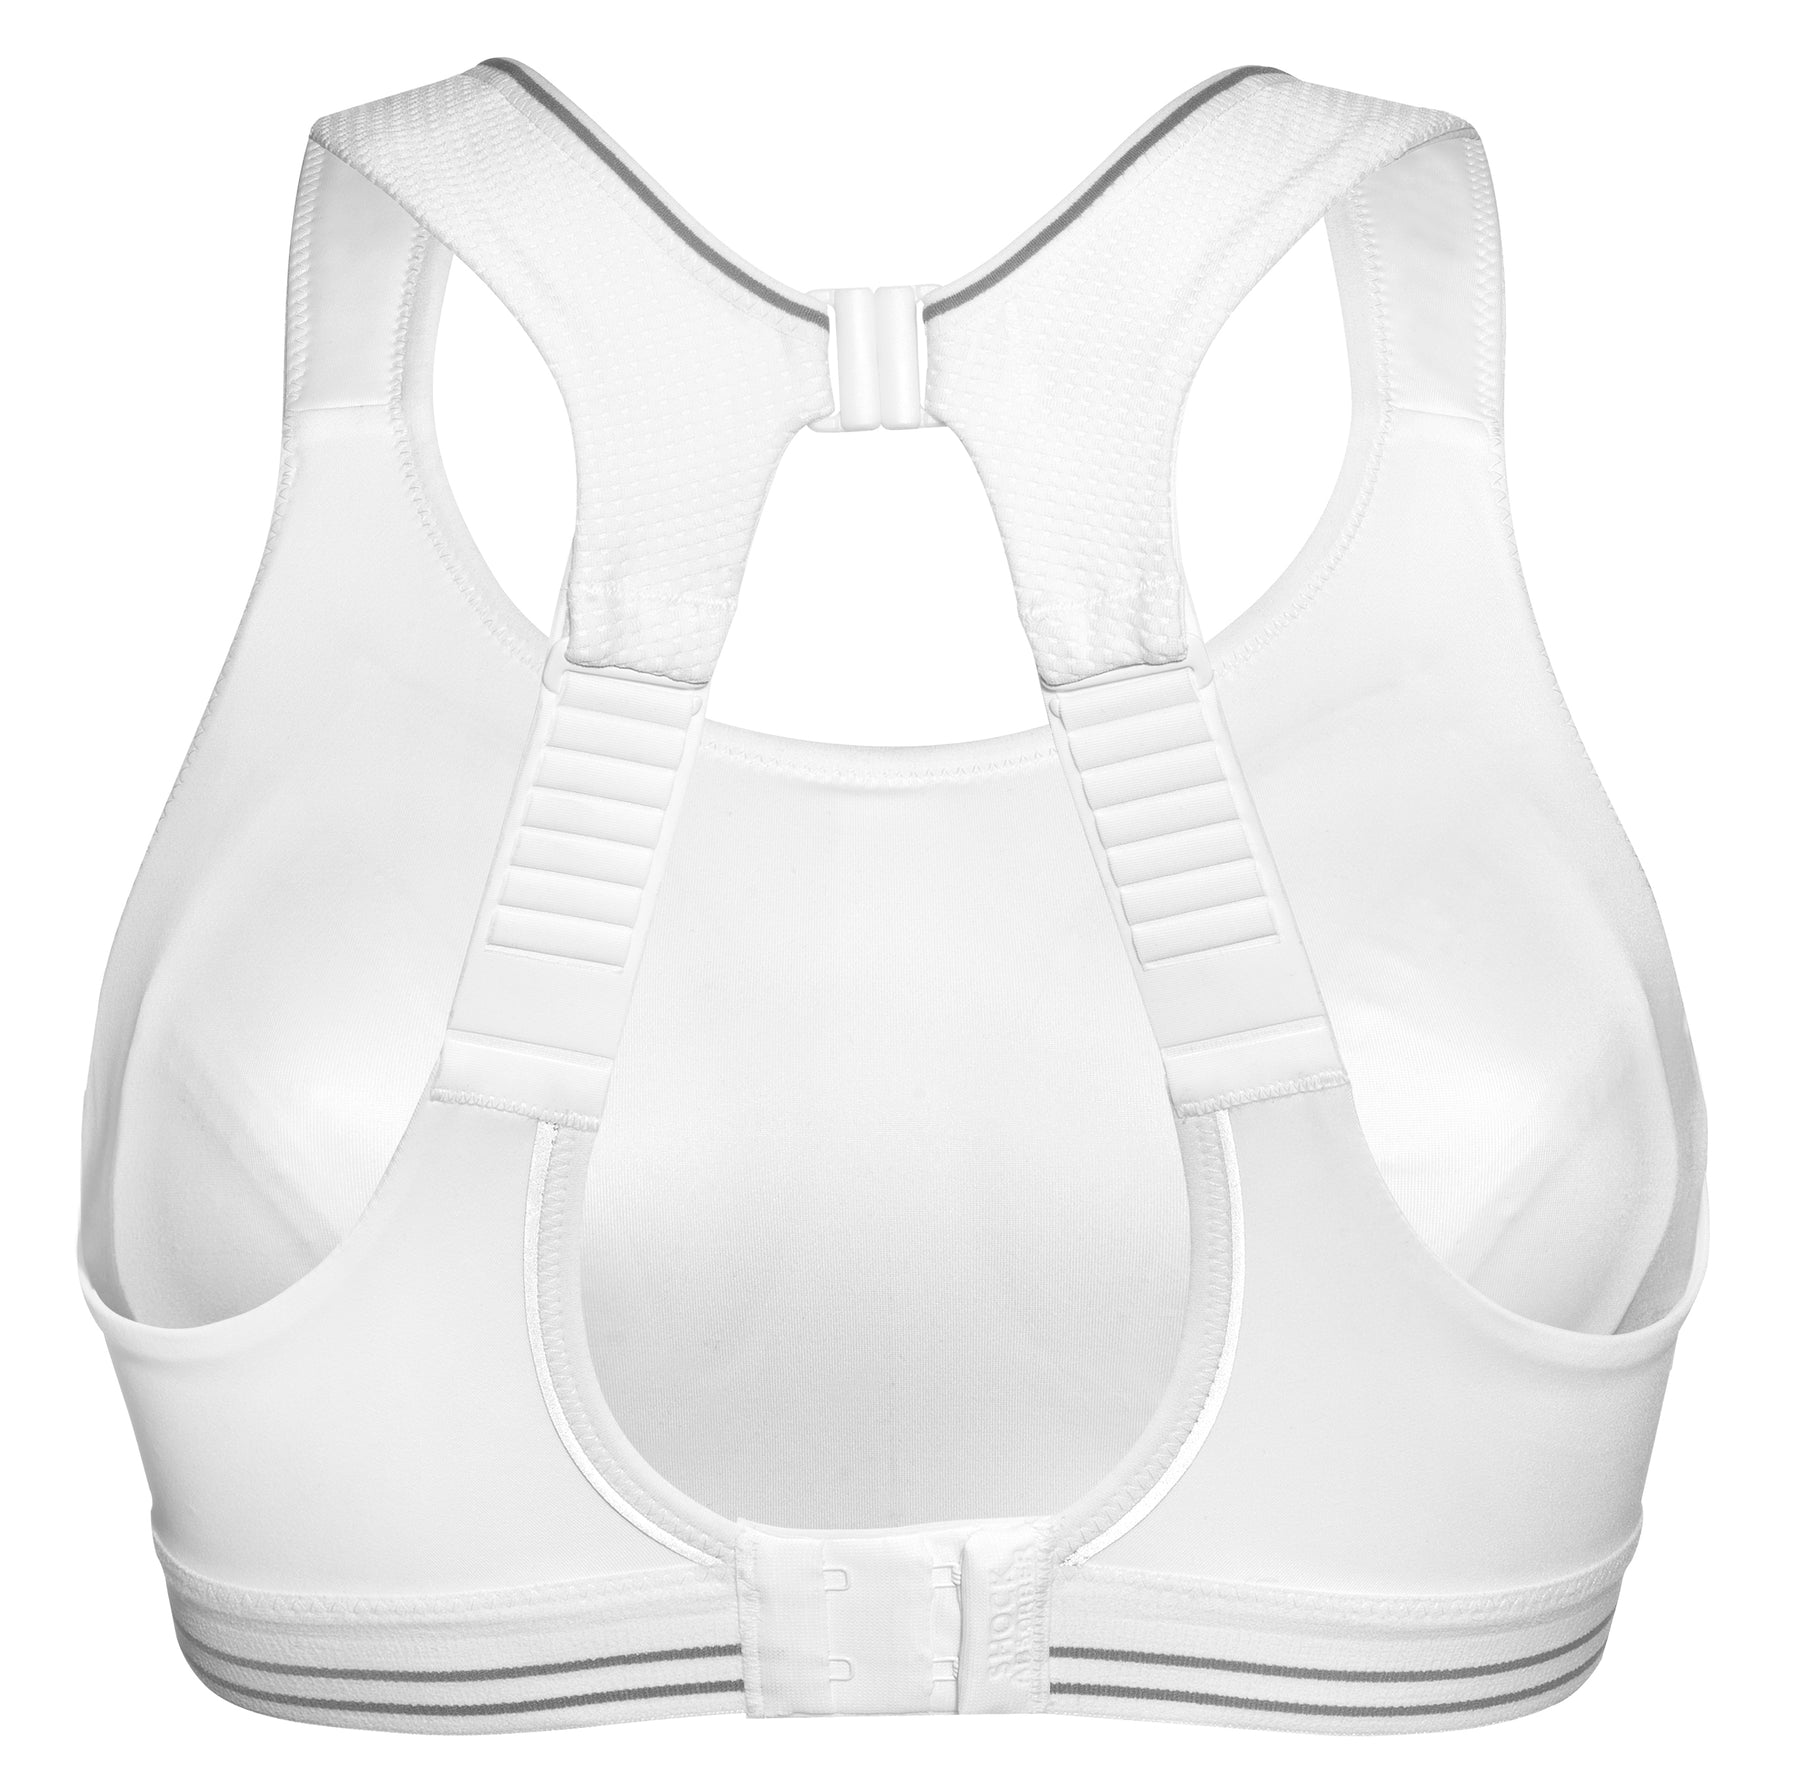 Ladies Sports Bra (with Extender) LG555 White 40DD at